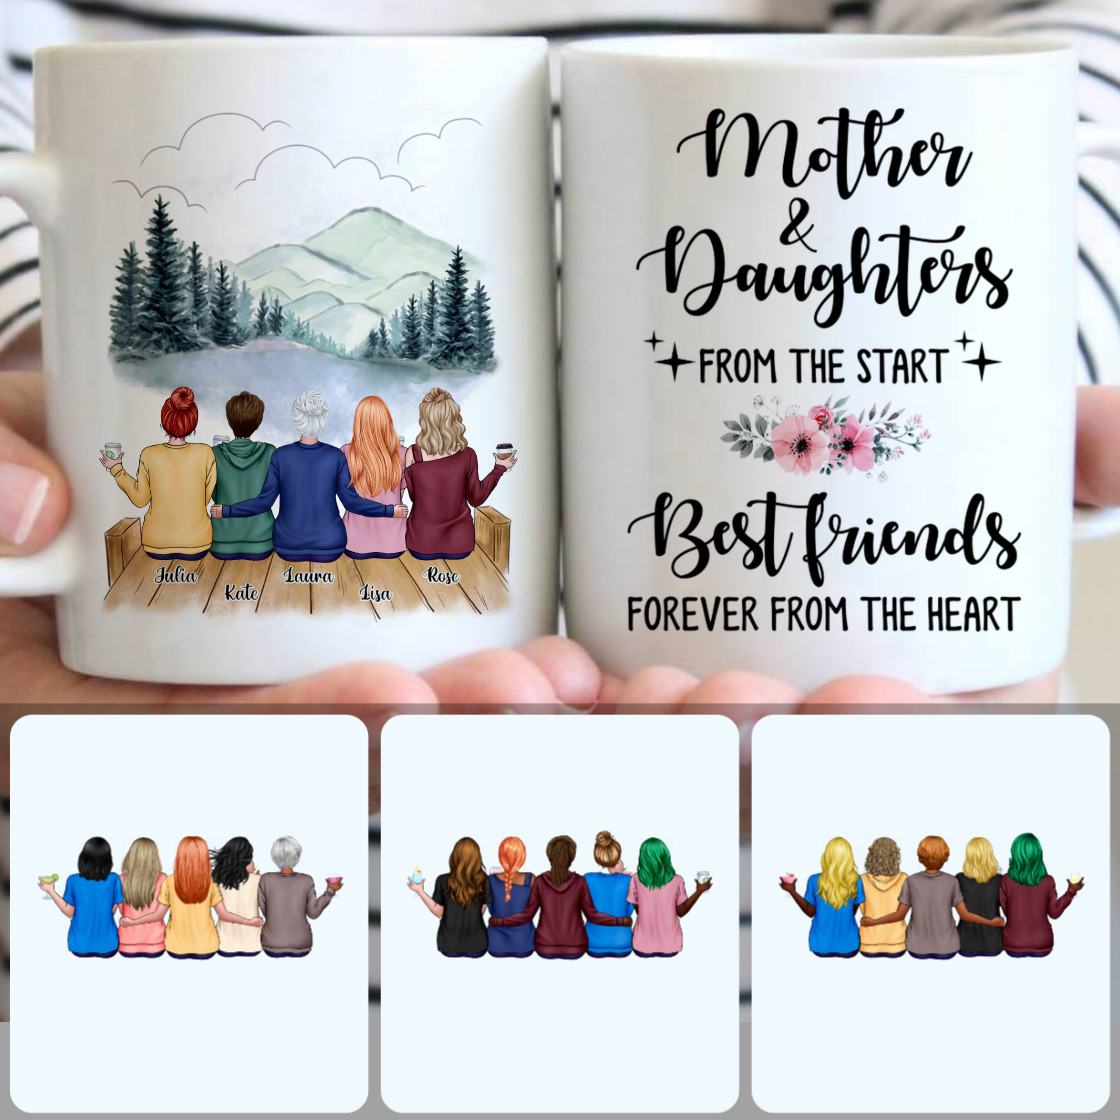 Personalized Mug, Perfect Gifts For Stepmom, Mother & 4 Daughters Customized Coffee Mug With Names